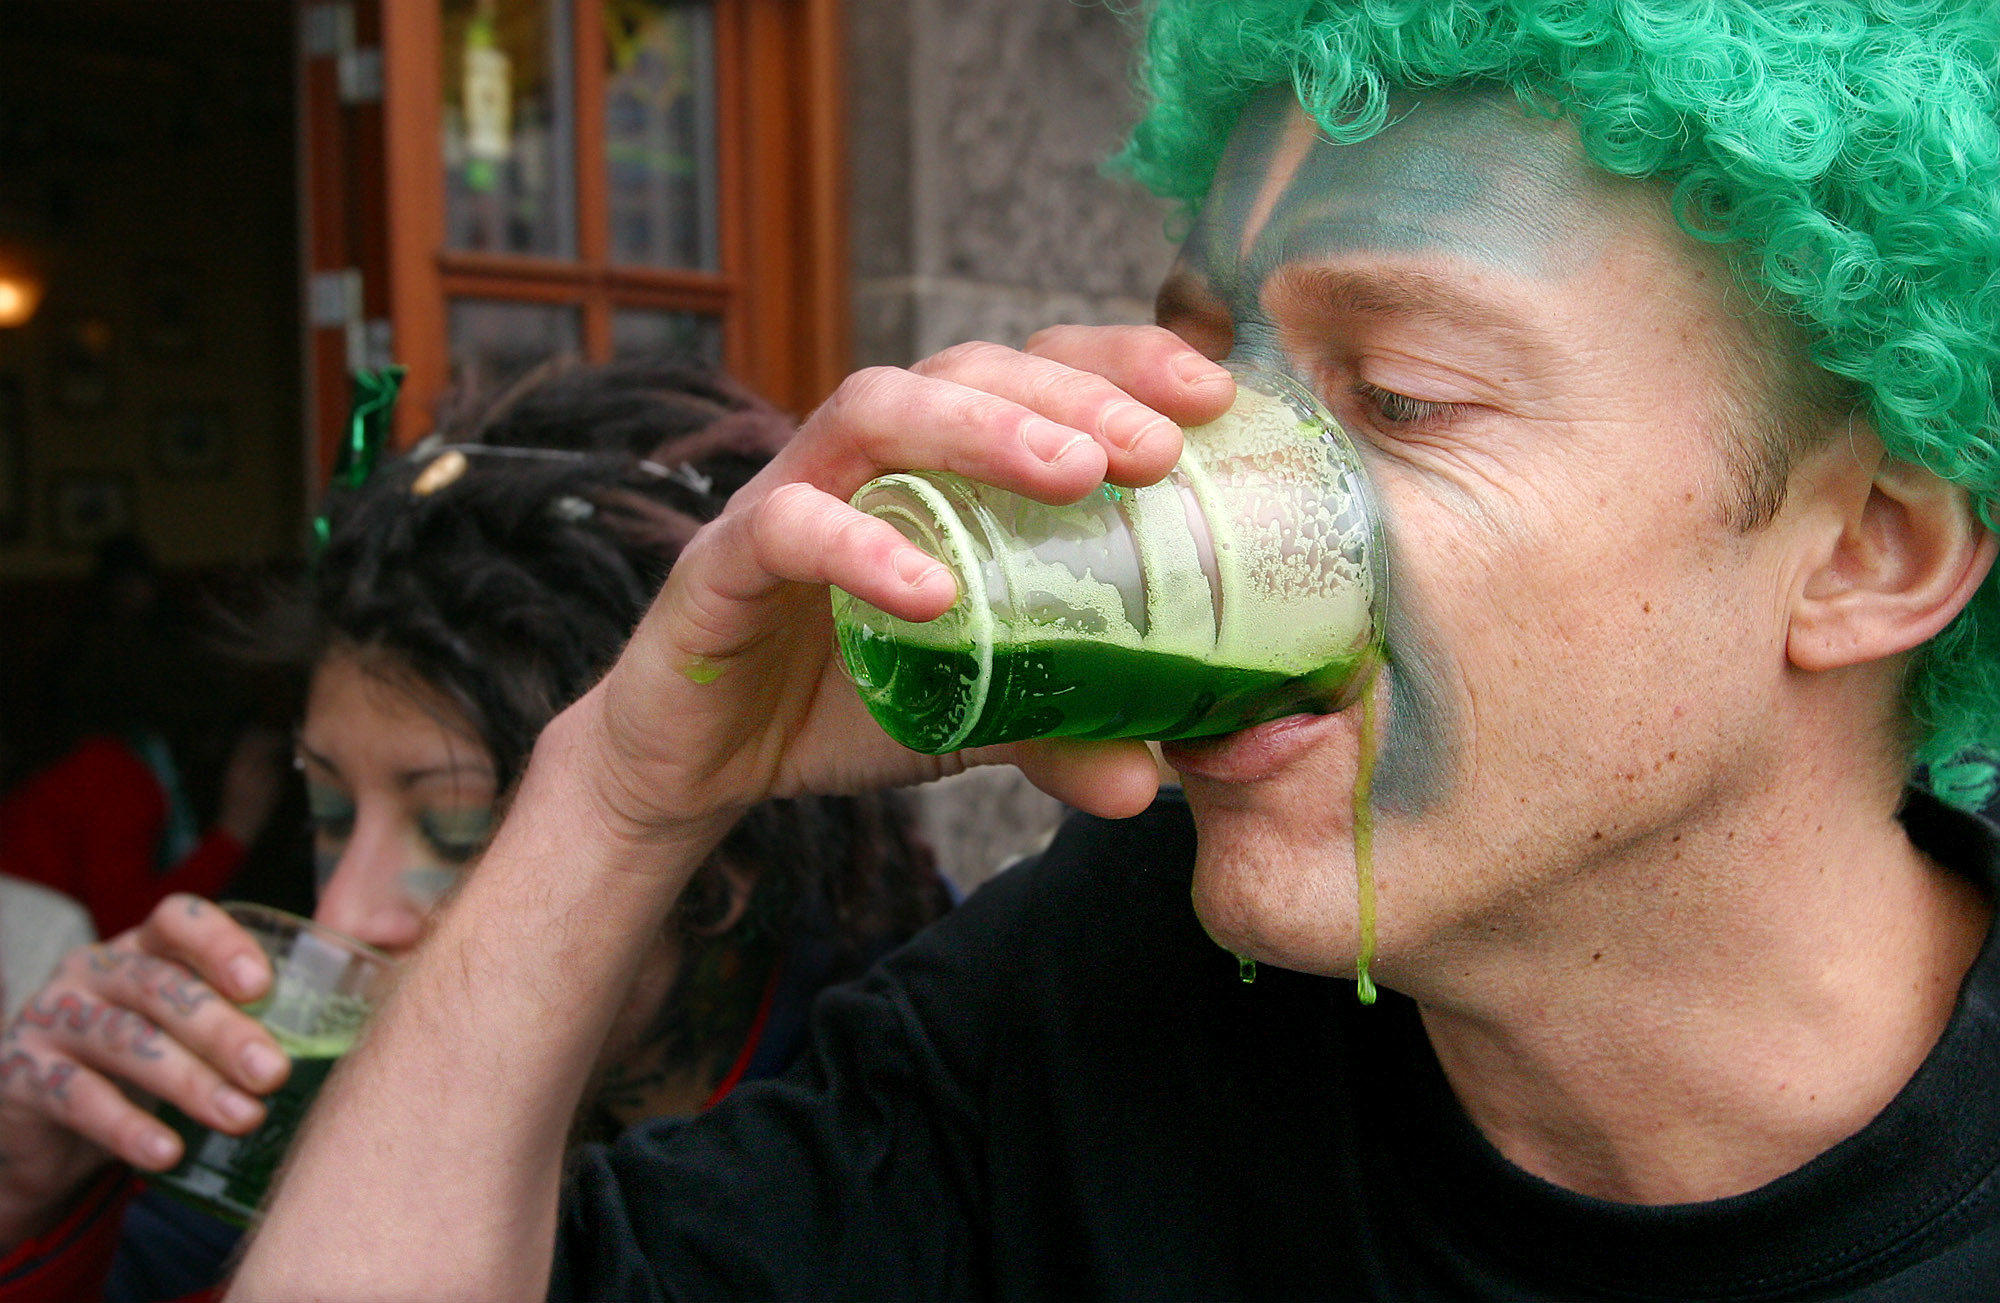 a man in a green wig chugs green beer with some of it dripping, a woman drinks green beer behind him 